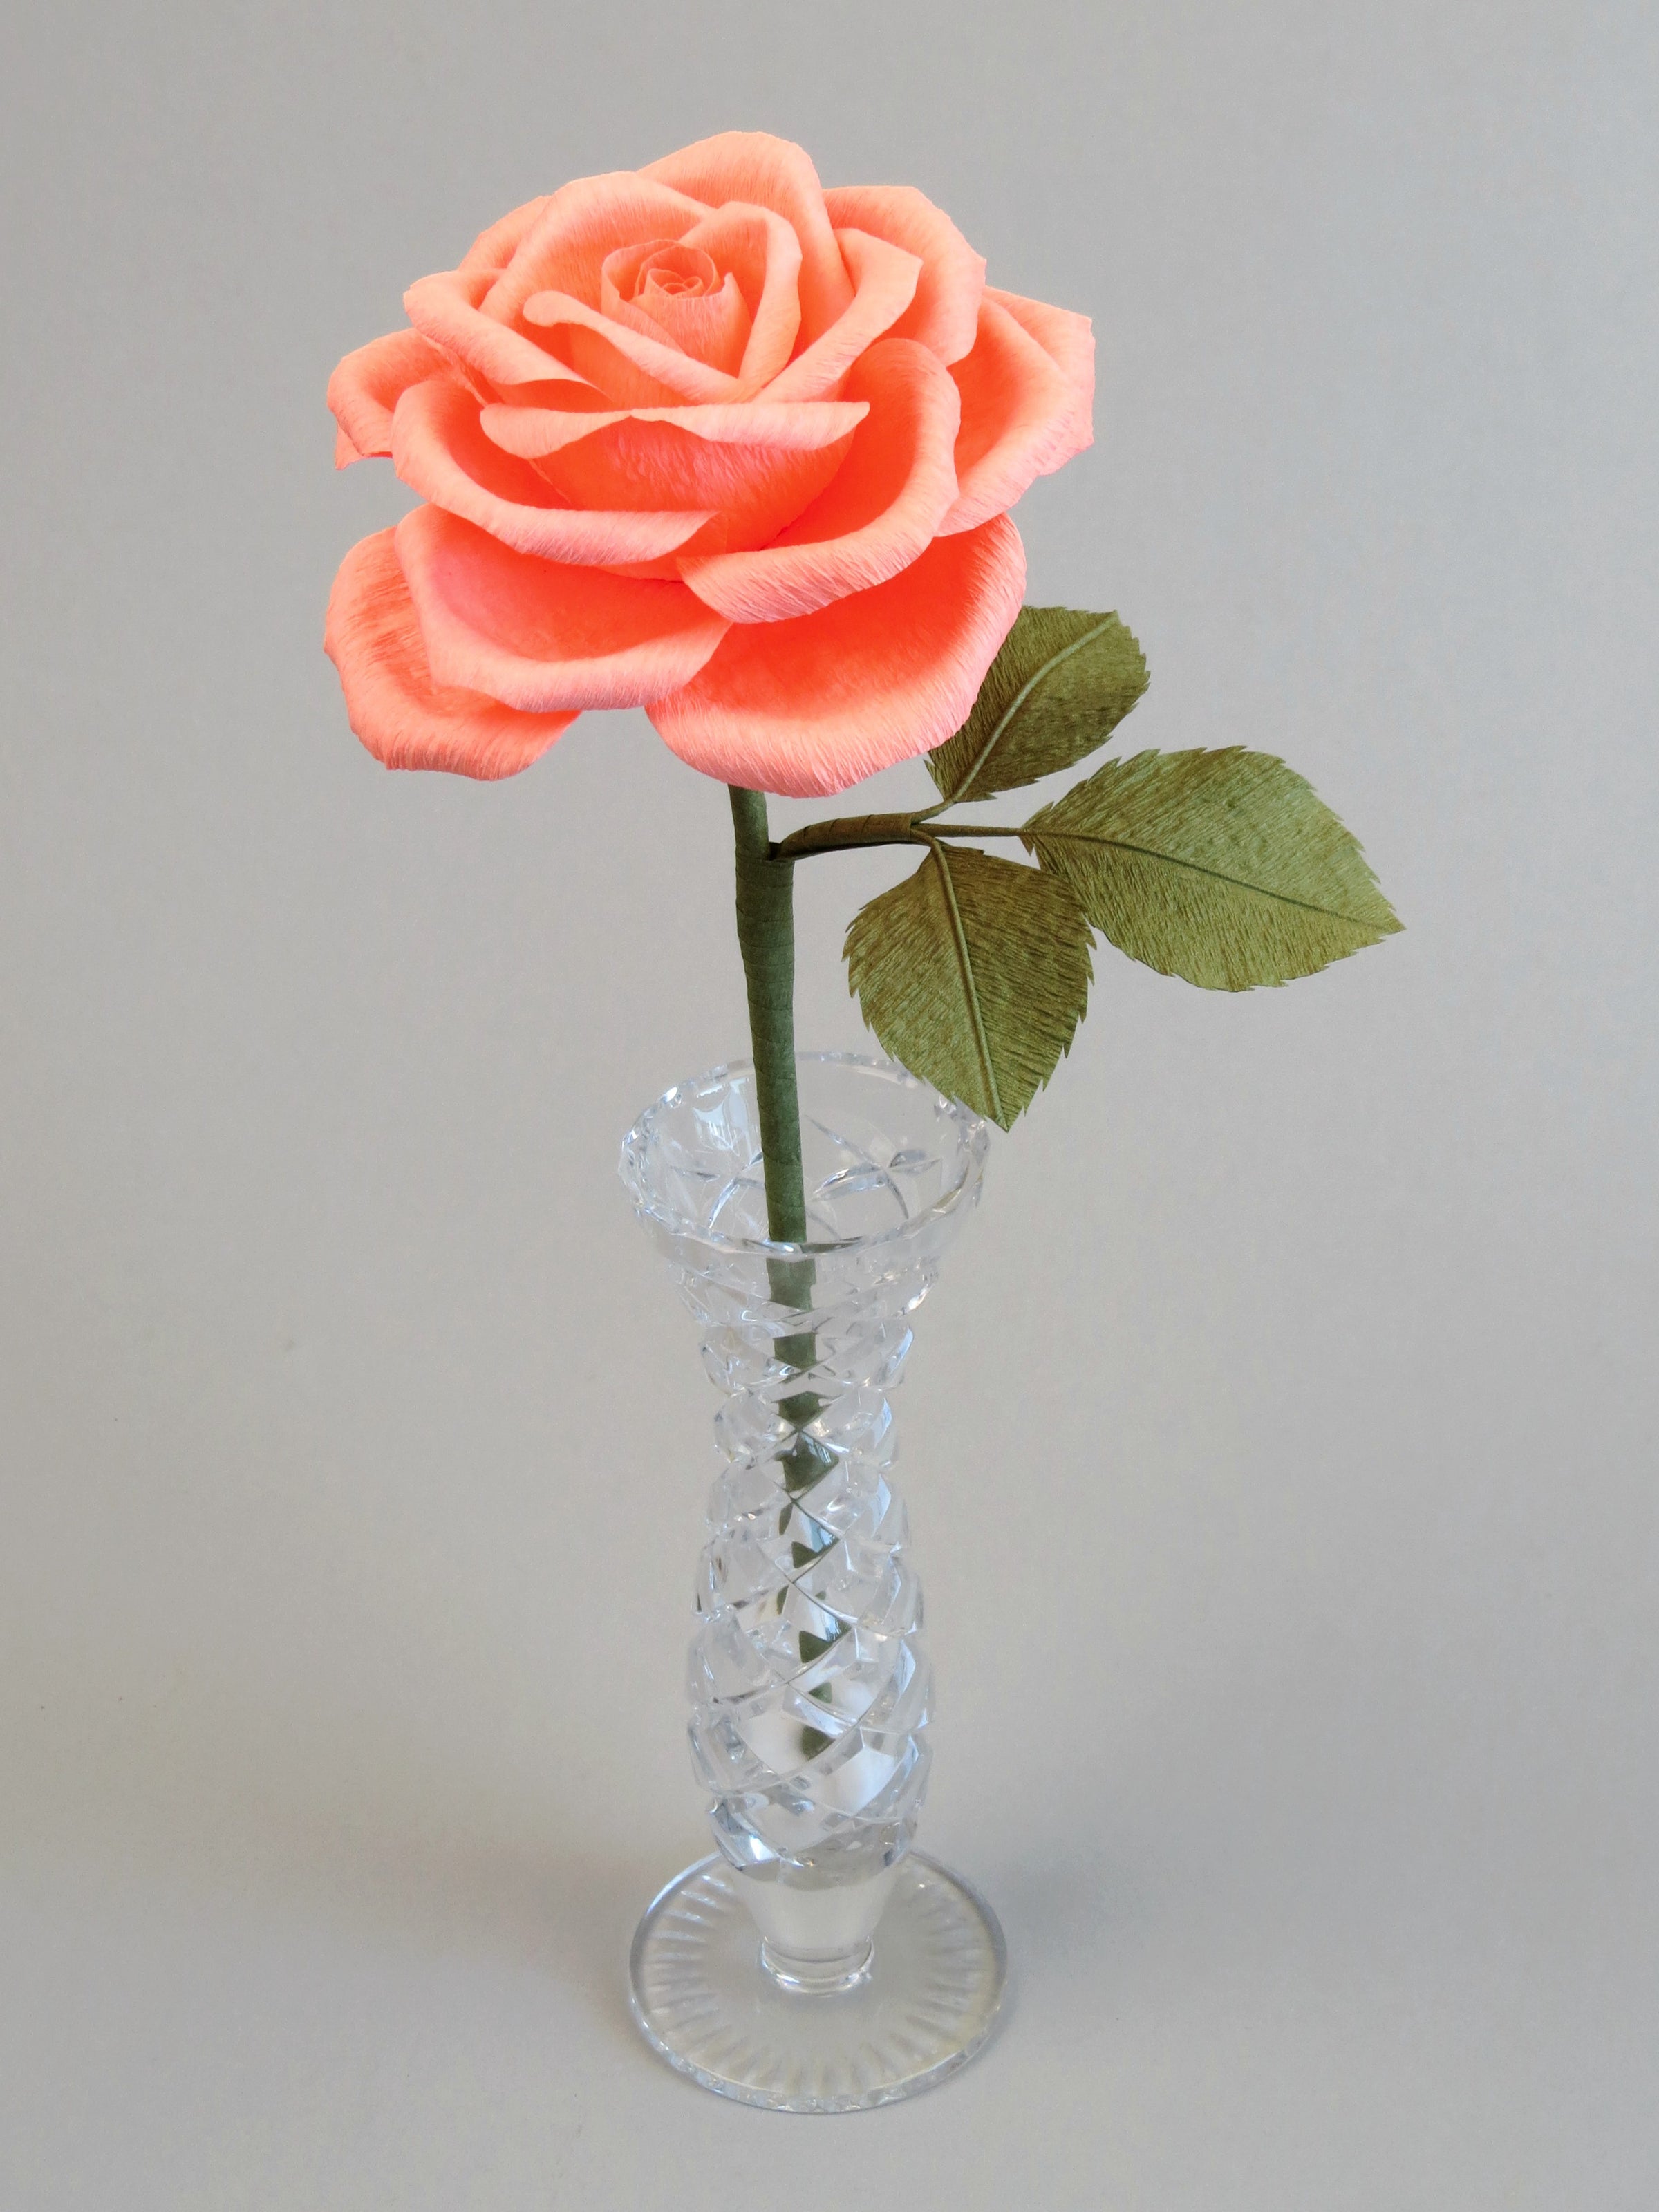 Coral pink crepe paper rose with three olive green leaves standing in a narrow glass vase against a light grey backdrop